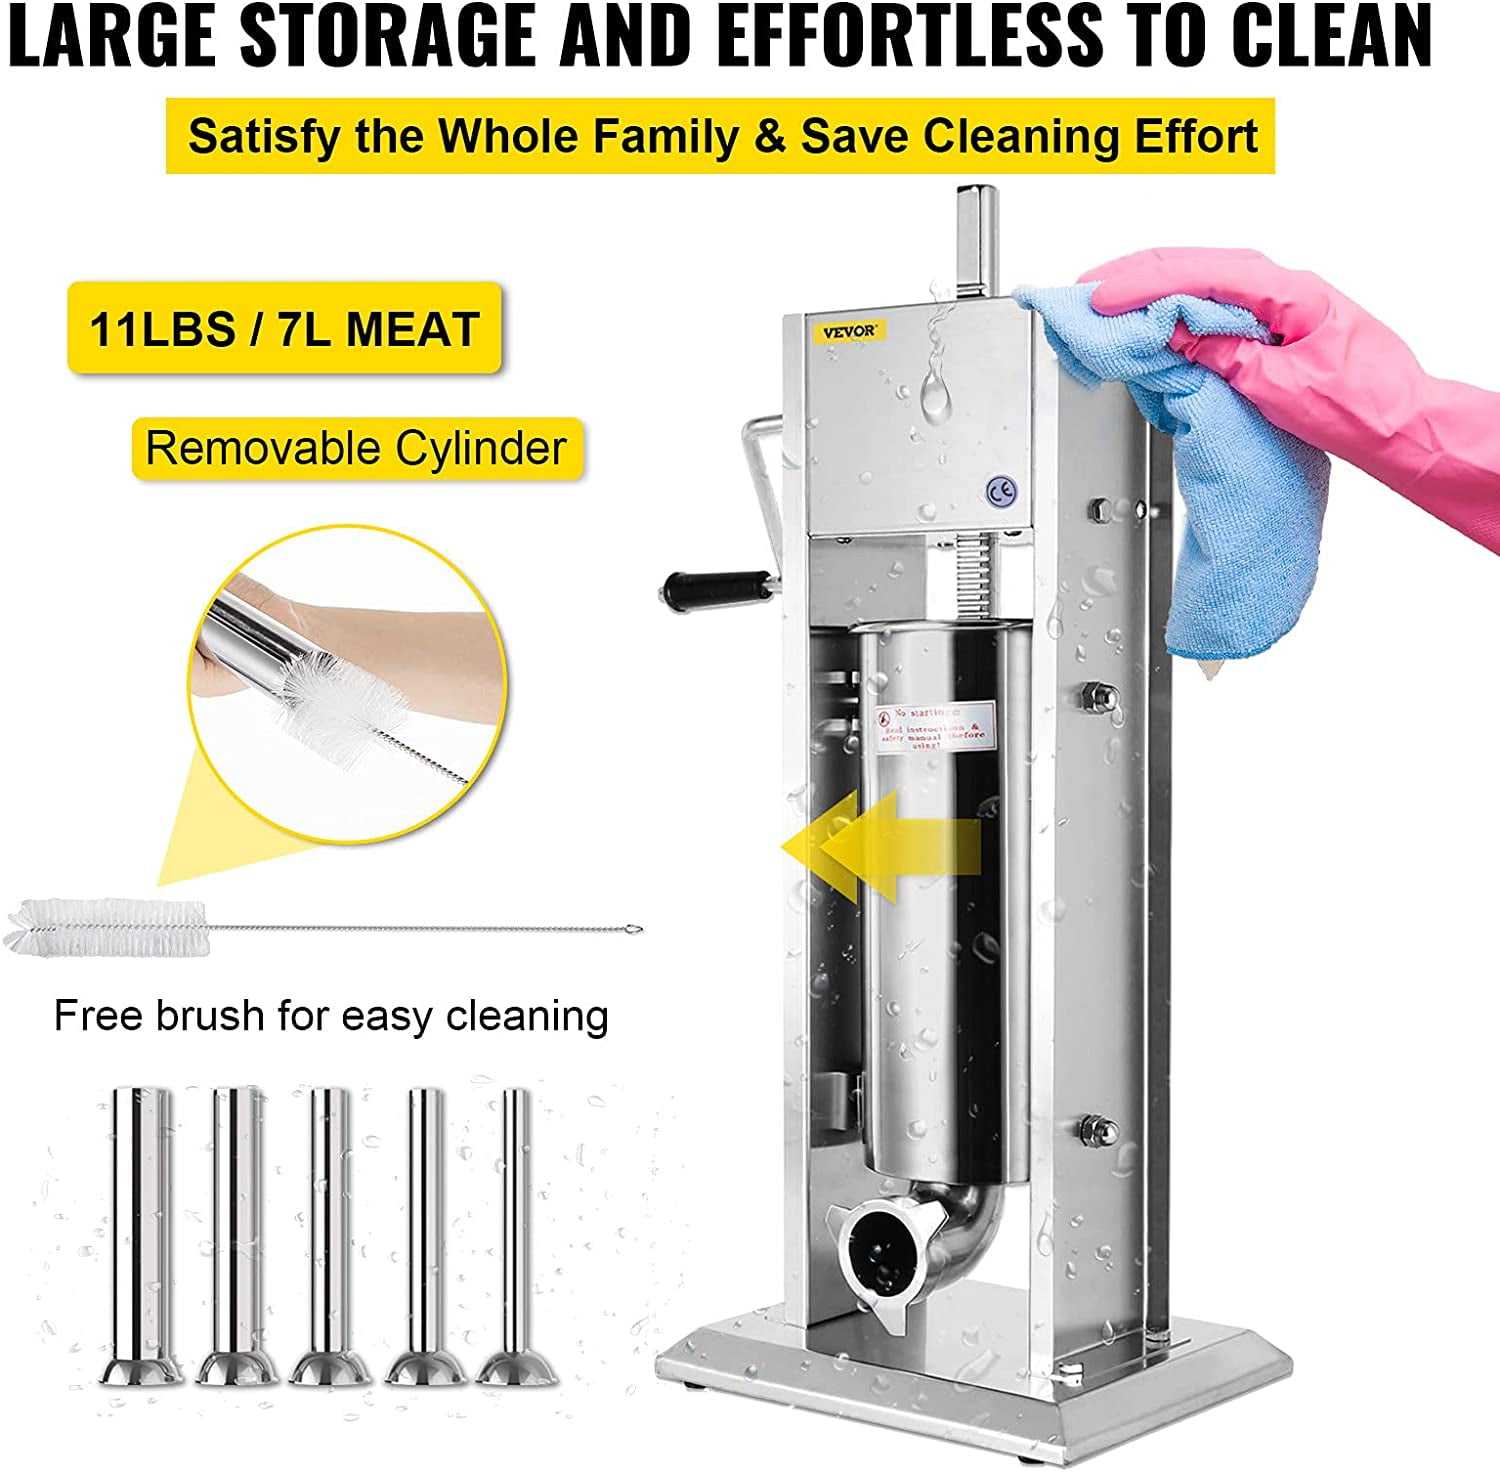 VEVOR Sausage Stuffer 25L Electric Sausage Stuffer Vertical Meat Stuffer  Stainless Steel Large Capacity Sausage Maker Commercial Meat Filler Machine  with 5 Filling Funnels for Home Restaurant Use 